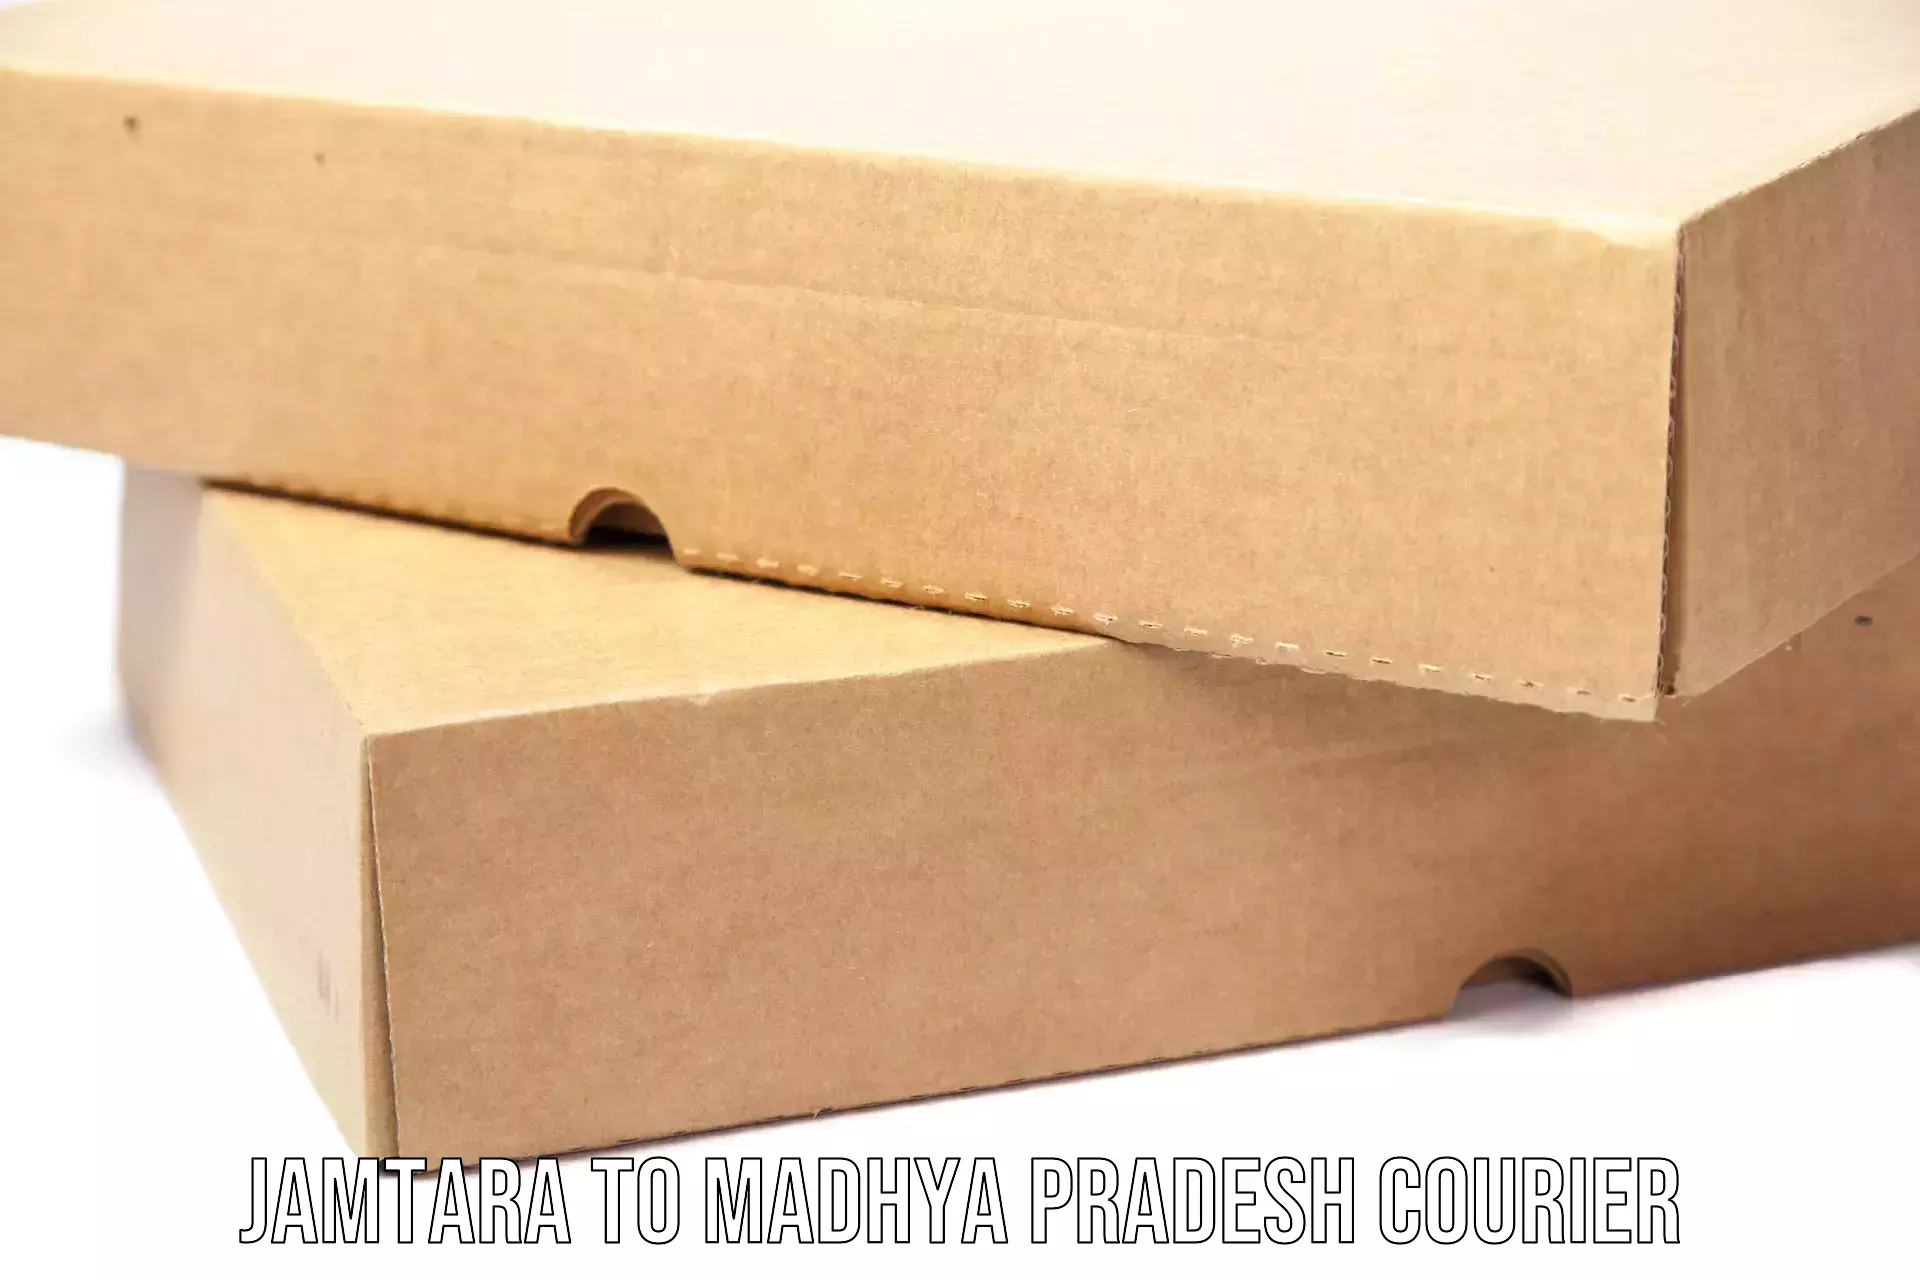 State-of-the-art courier technology Jamtara to Raipur Karchuliyan